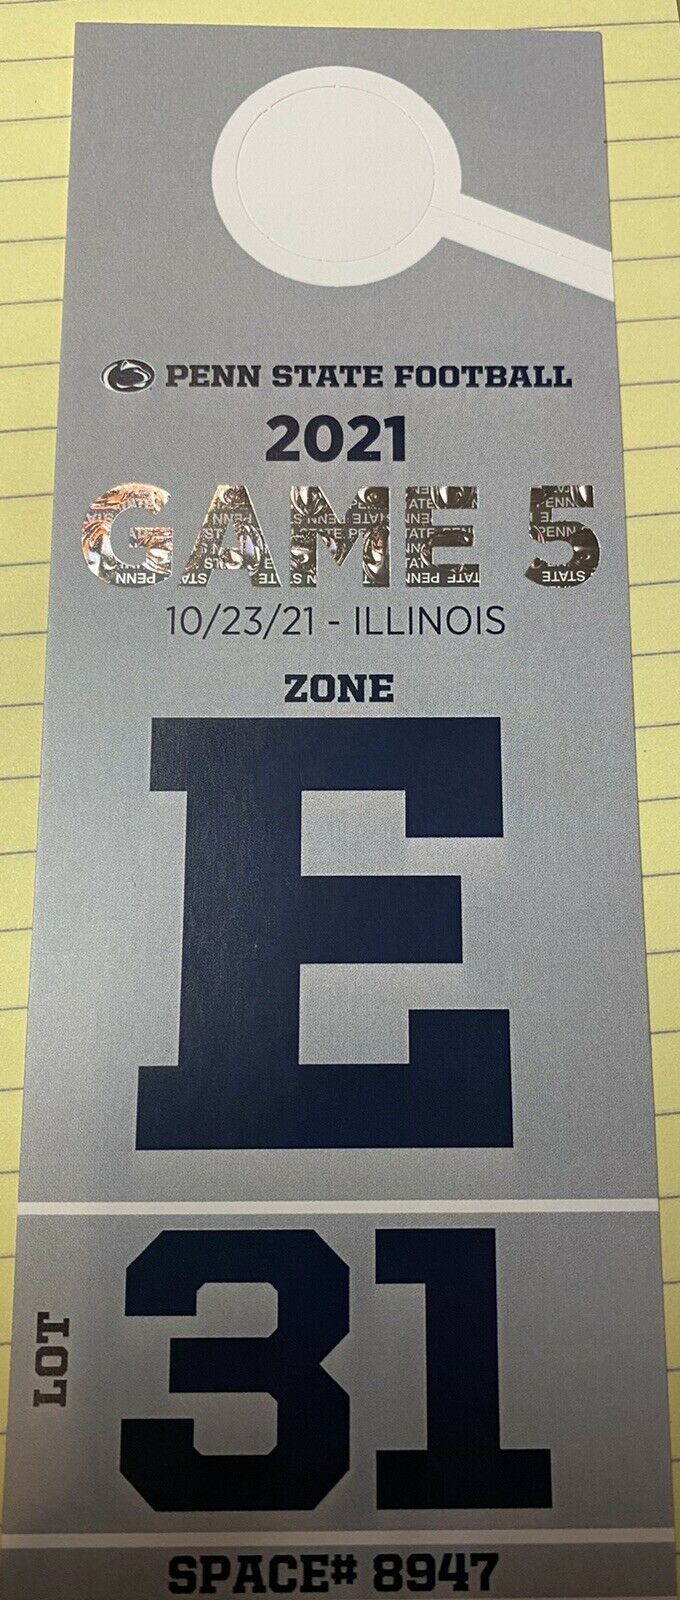 Penn State Vs. Illinois Reserved Lot 31 Parking Pass $145 Homecoming